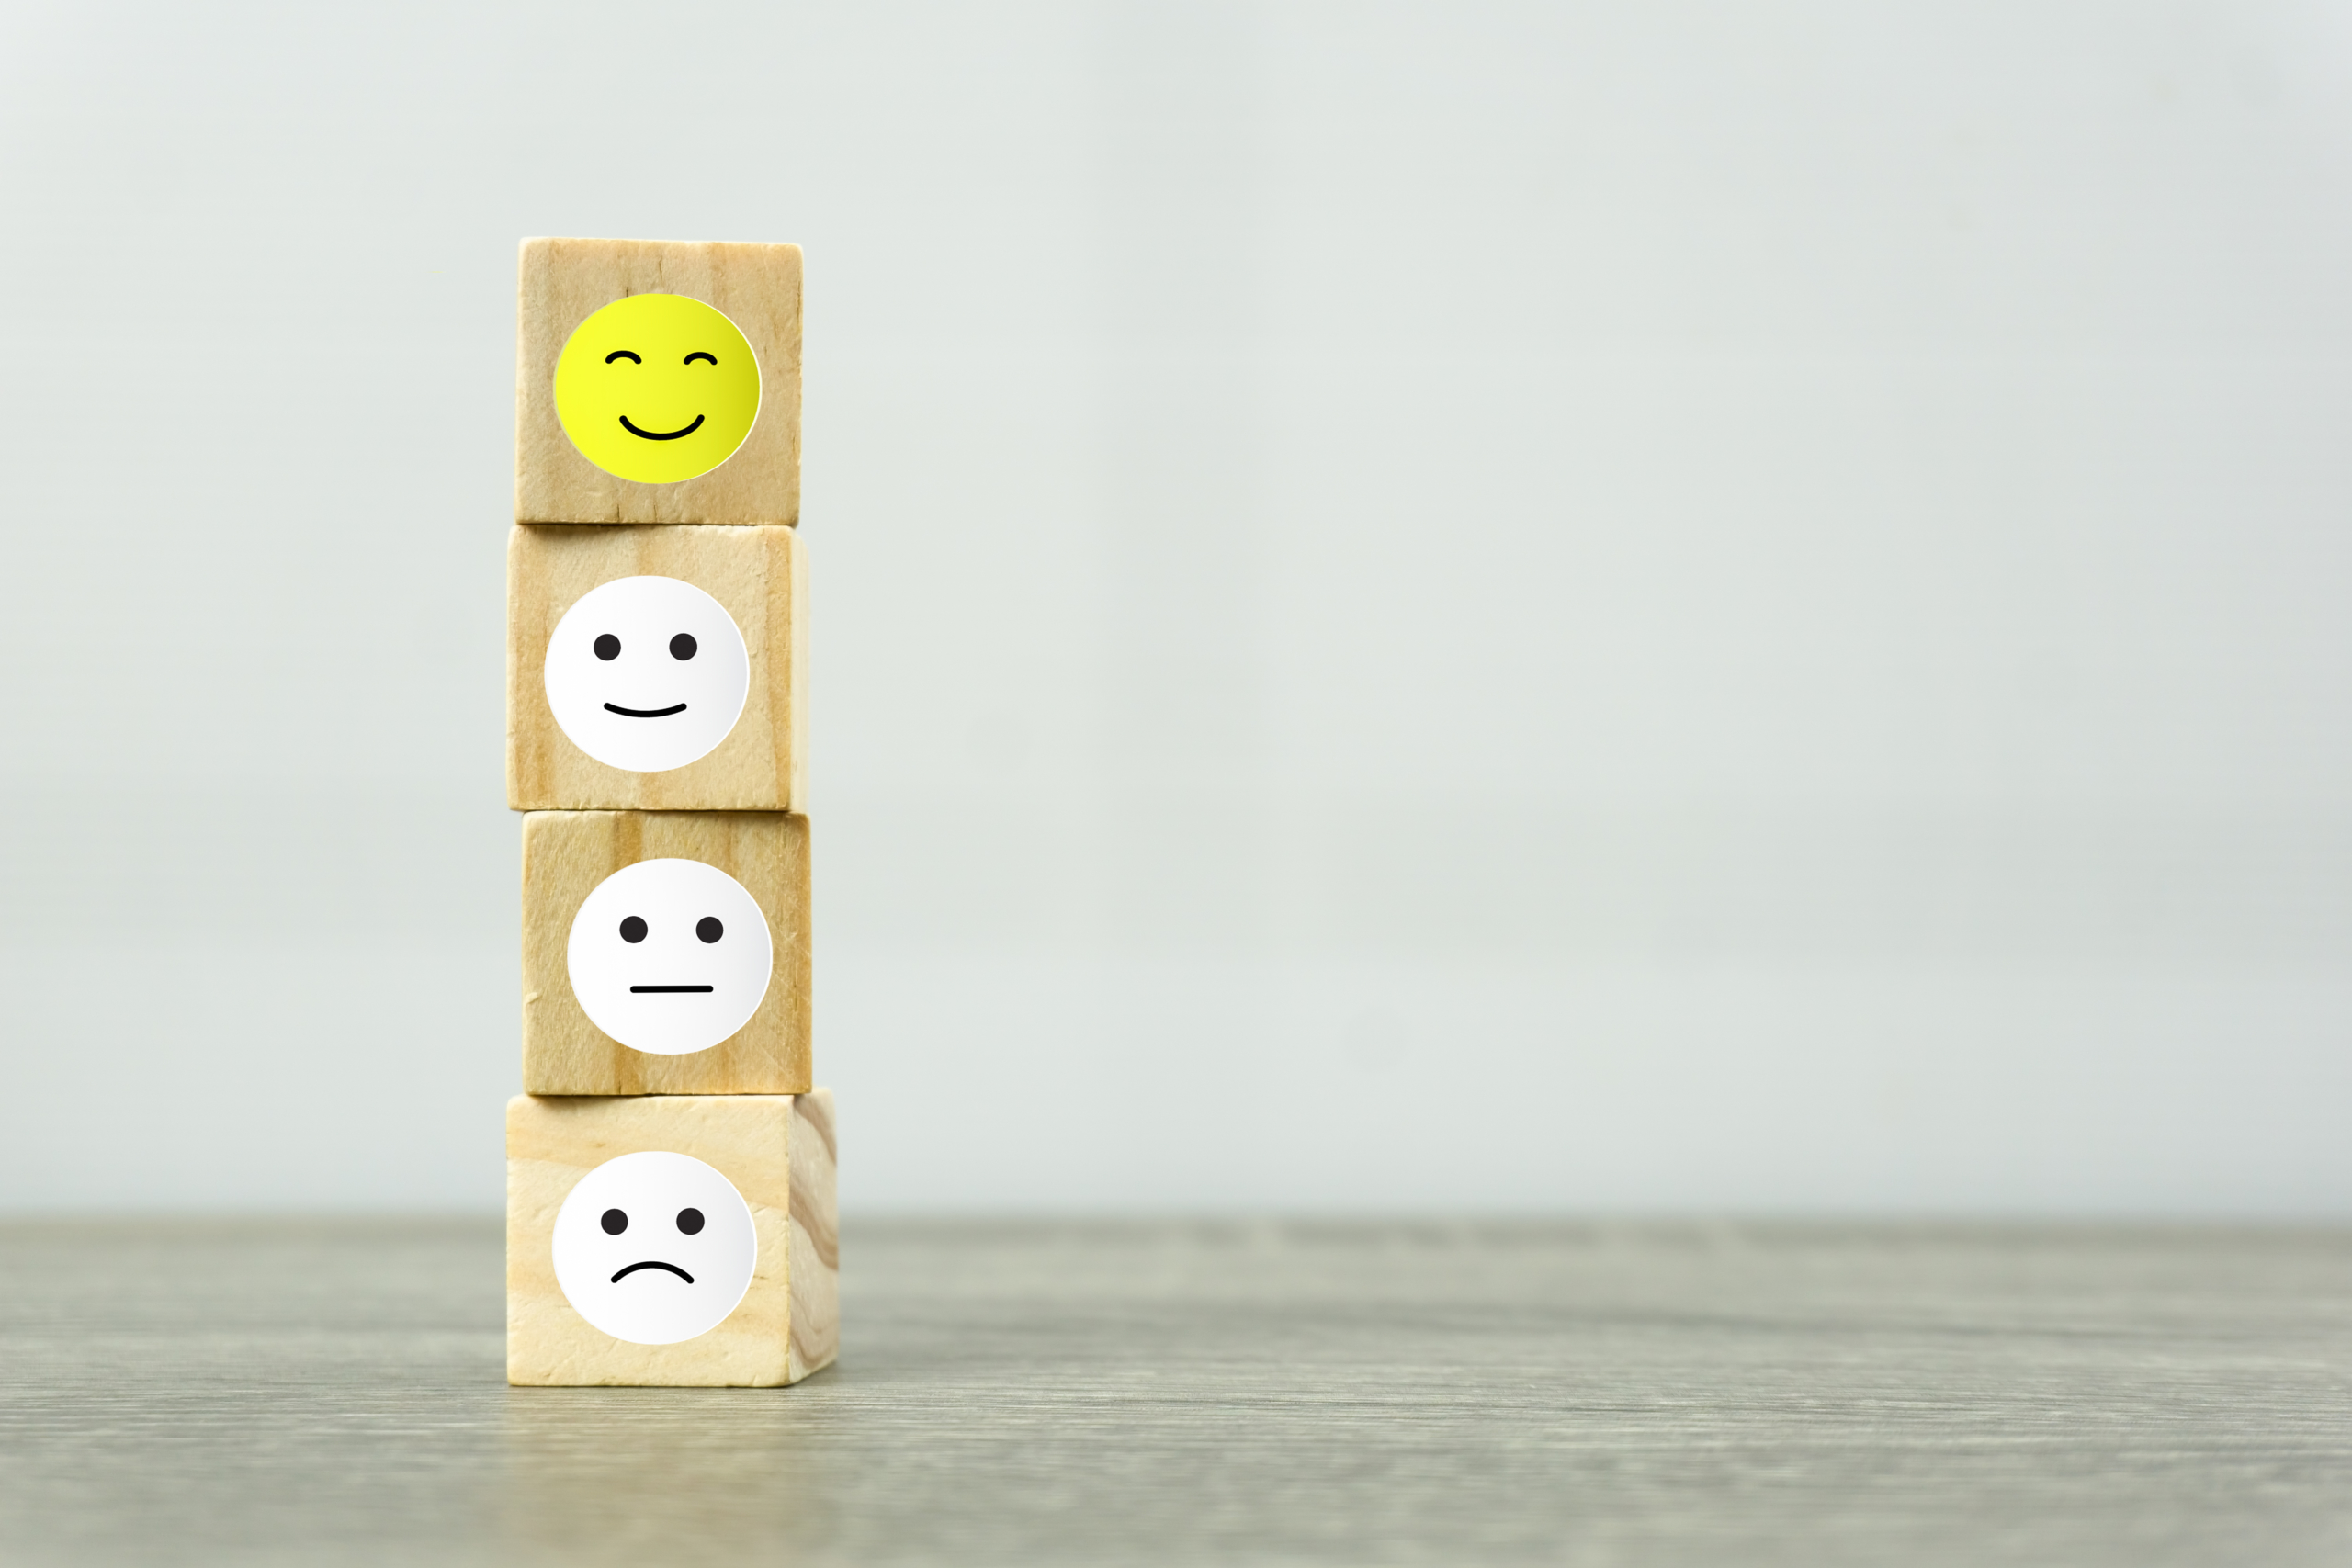 four stacked building blocks with sad to smiley faces